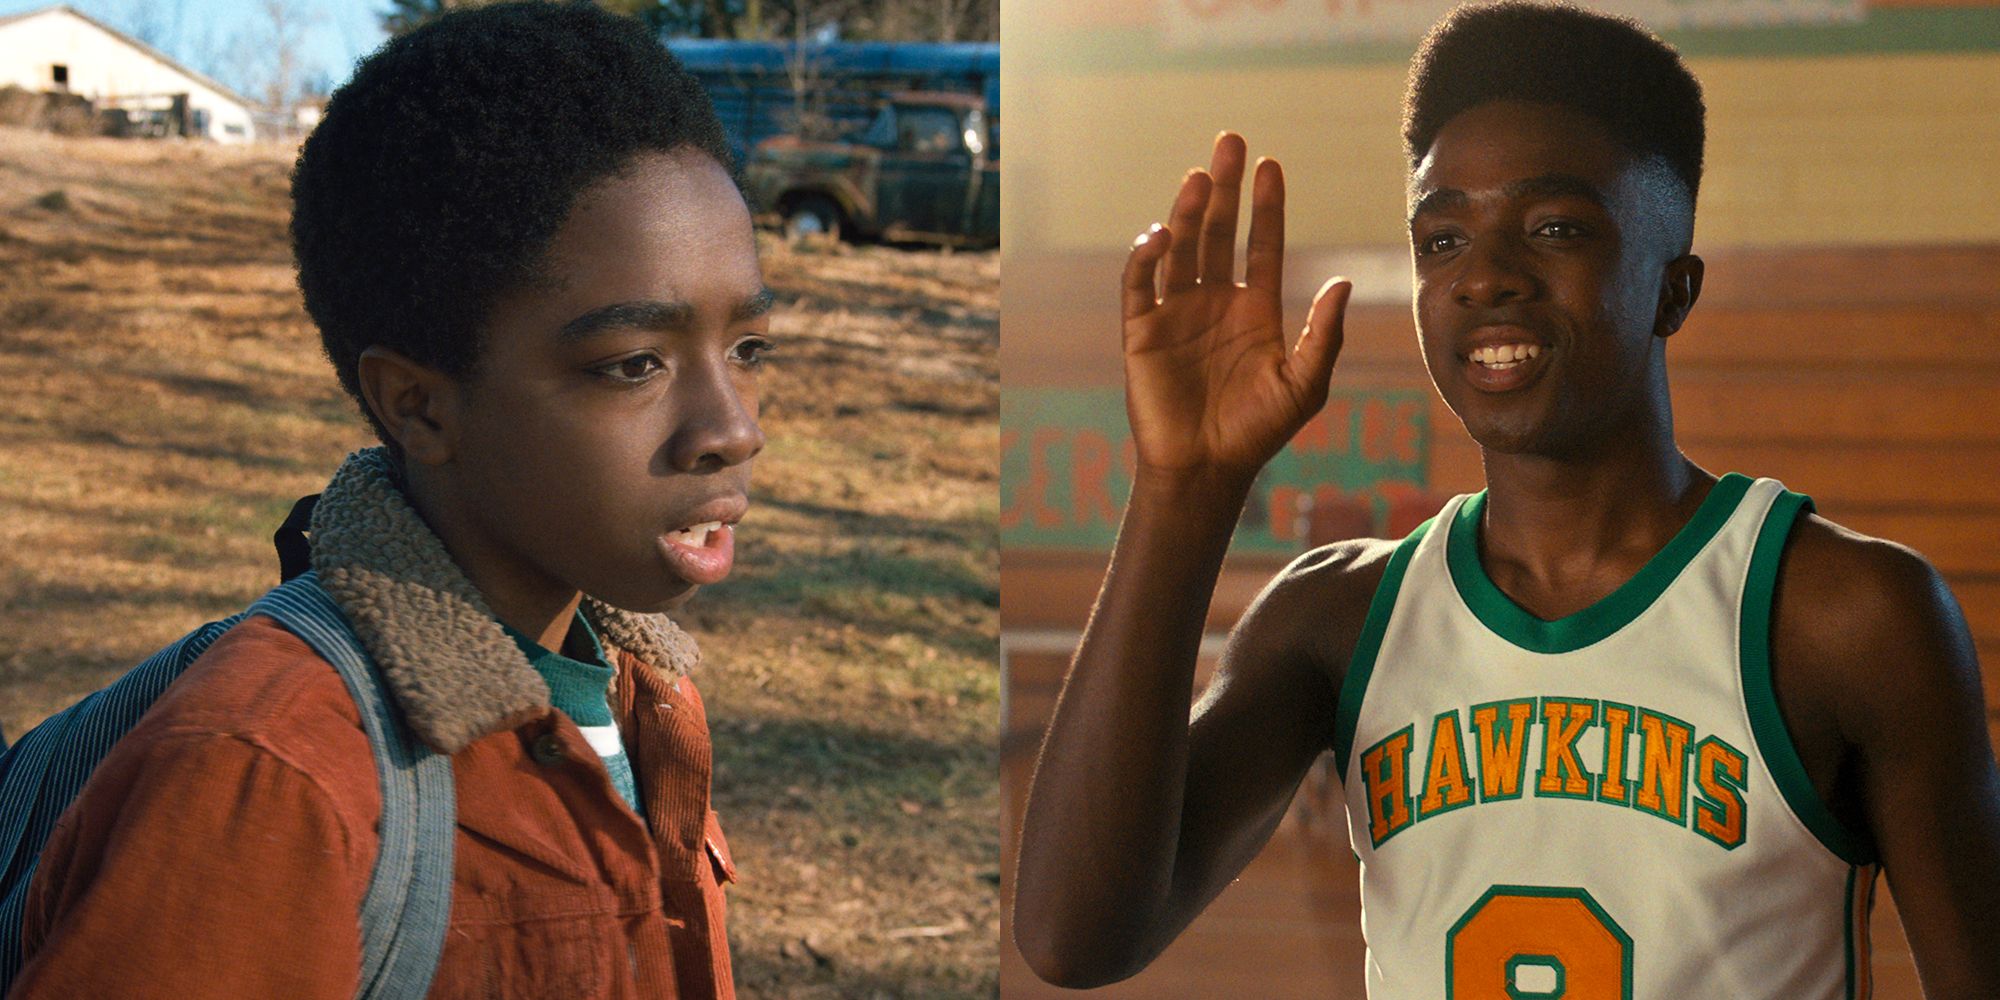 See How Grown Up The Cast of Stranger Things is Now